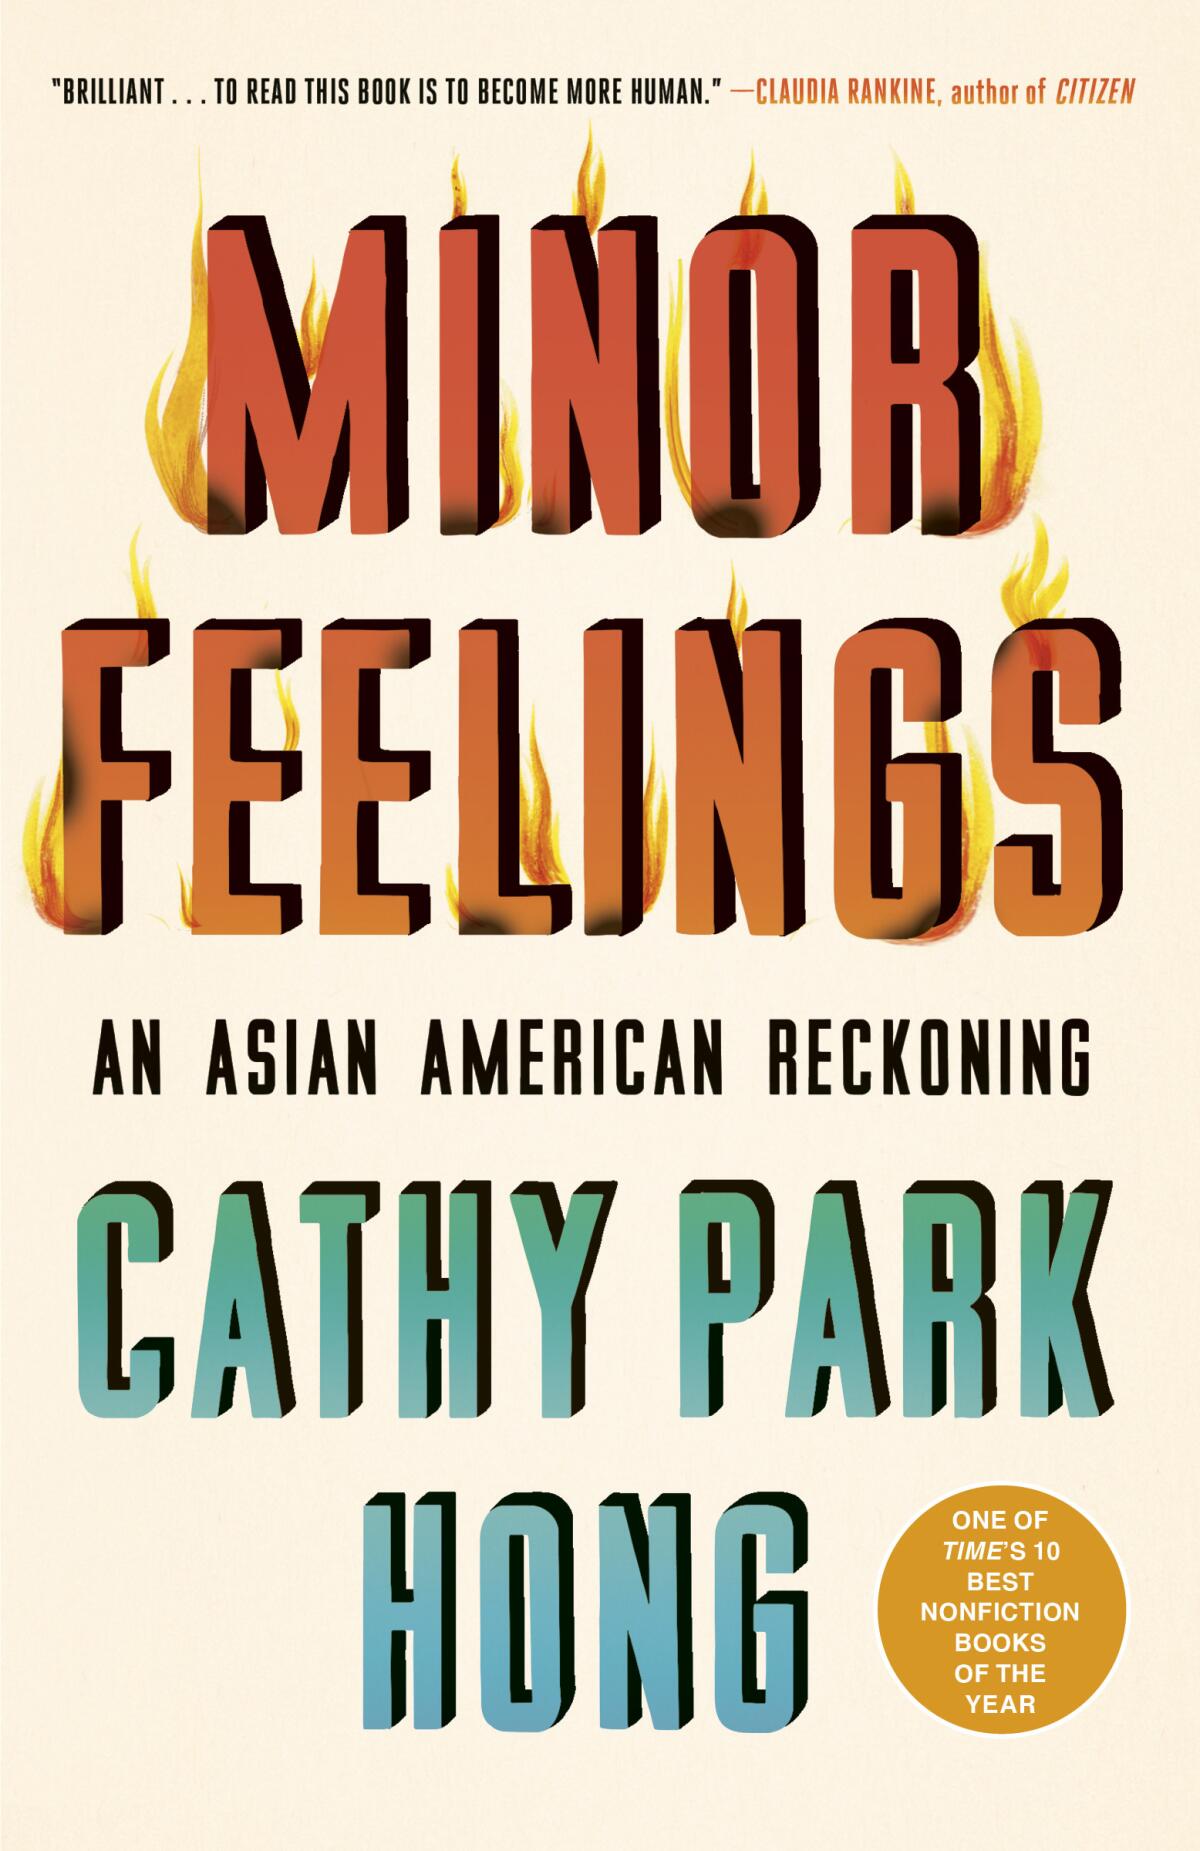 Book jacket for "Minor Feelings" by Cathy Park Hong